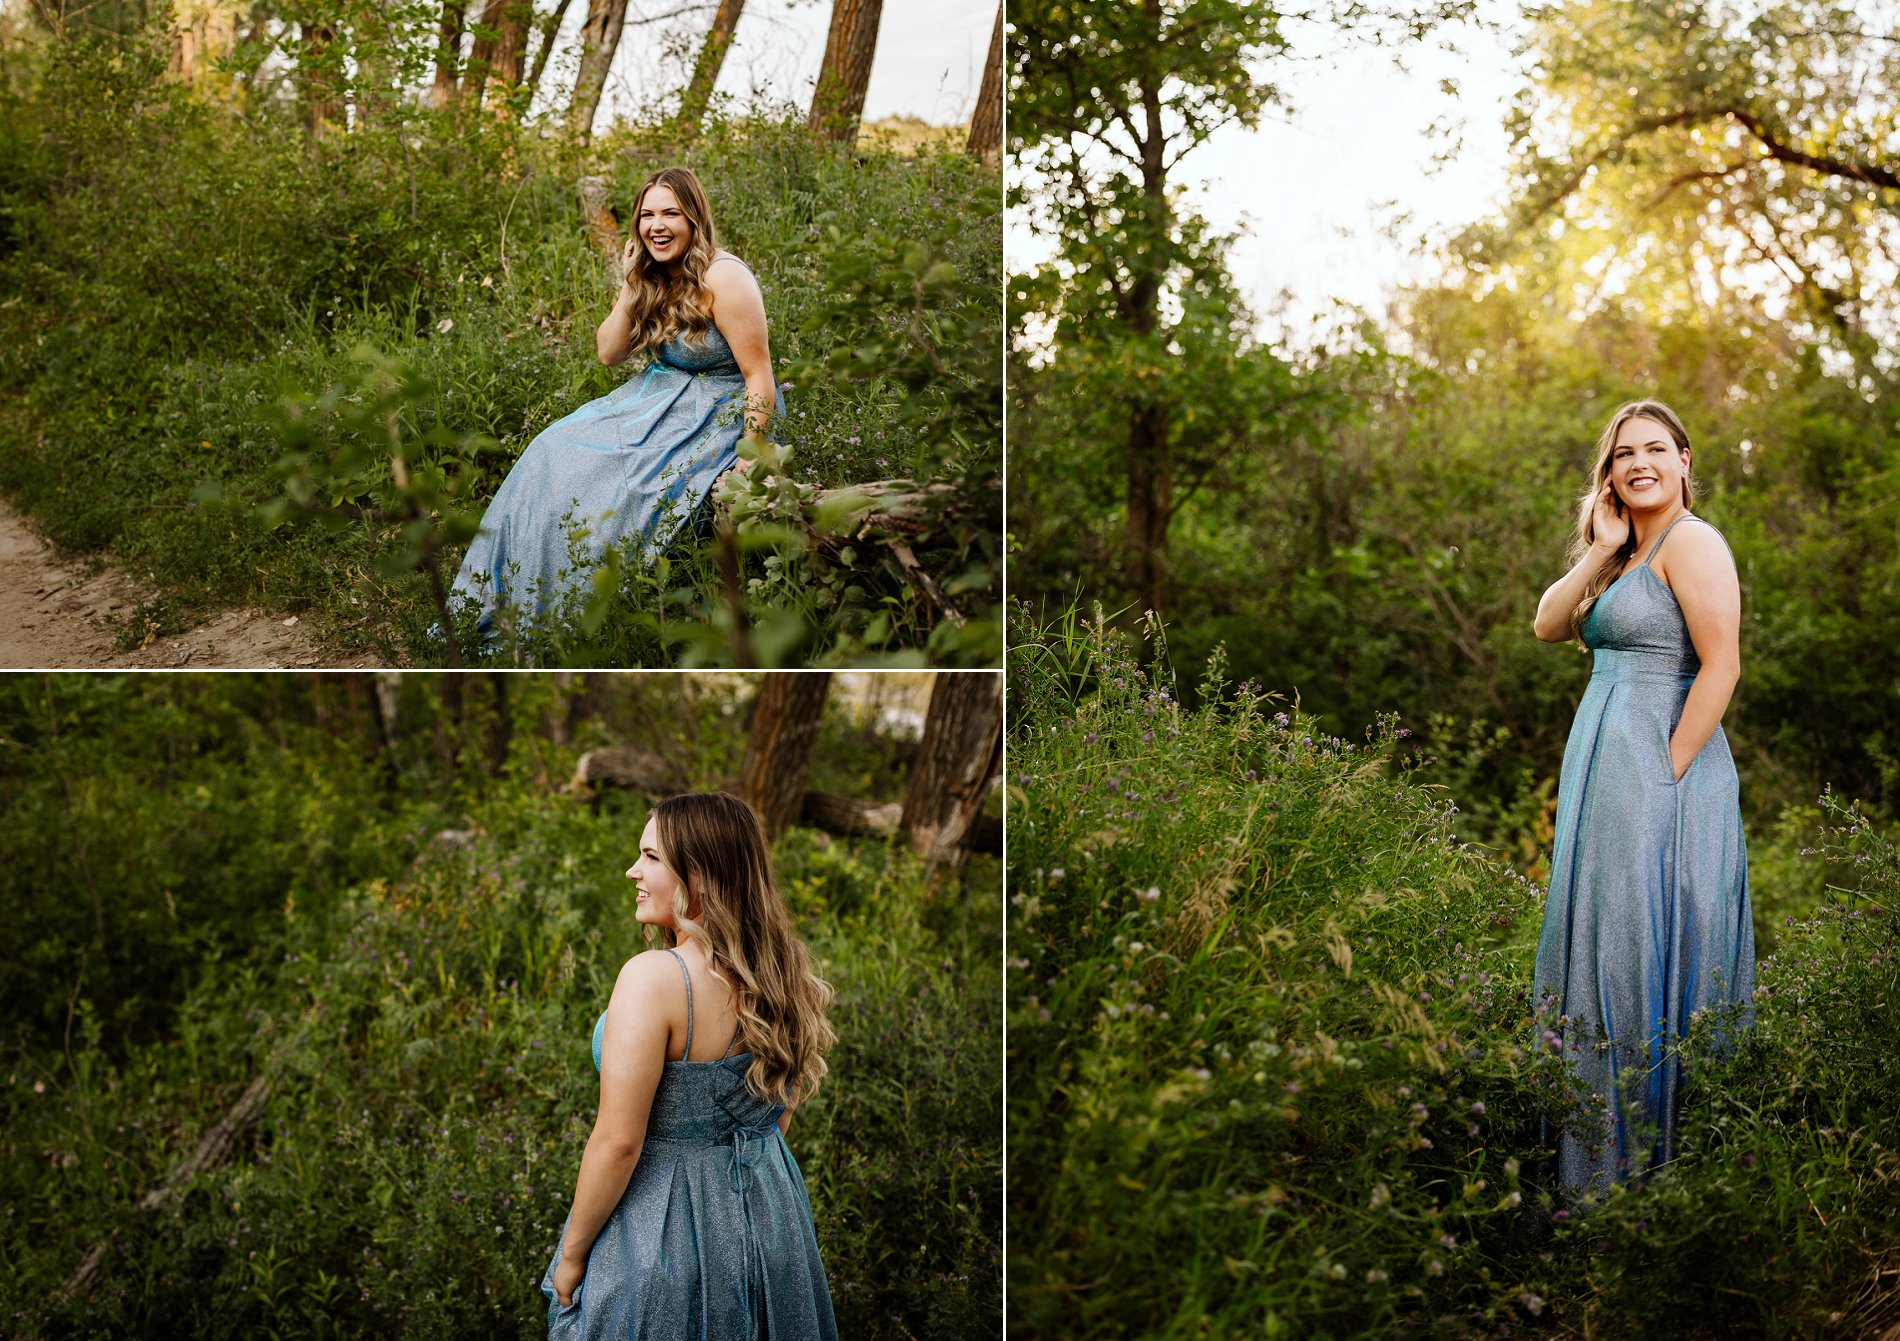 Aden Bowman graduate poses for grad photos in the forest in a blue dress.